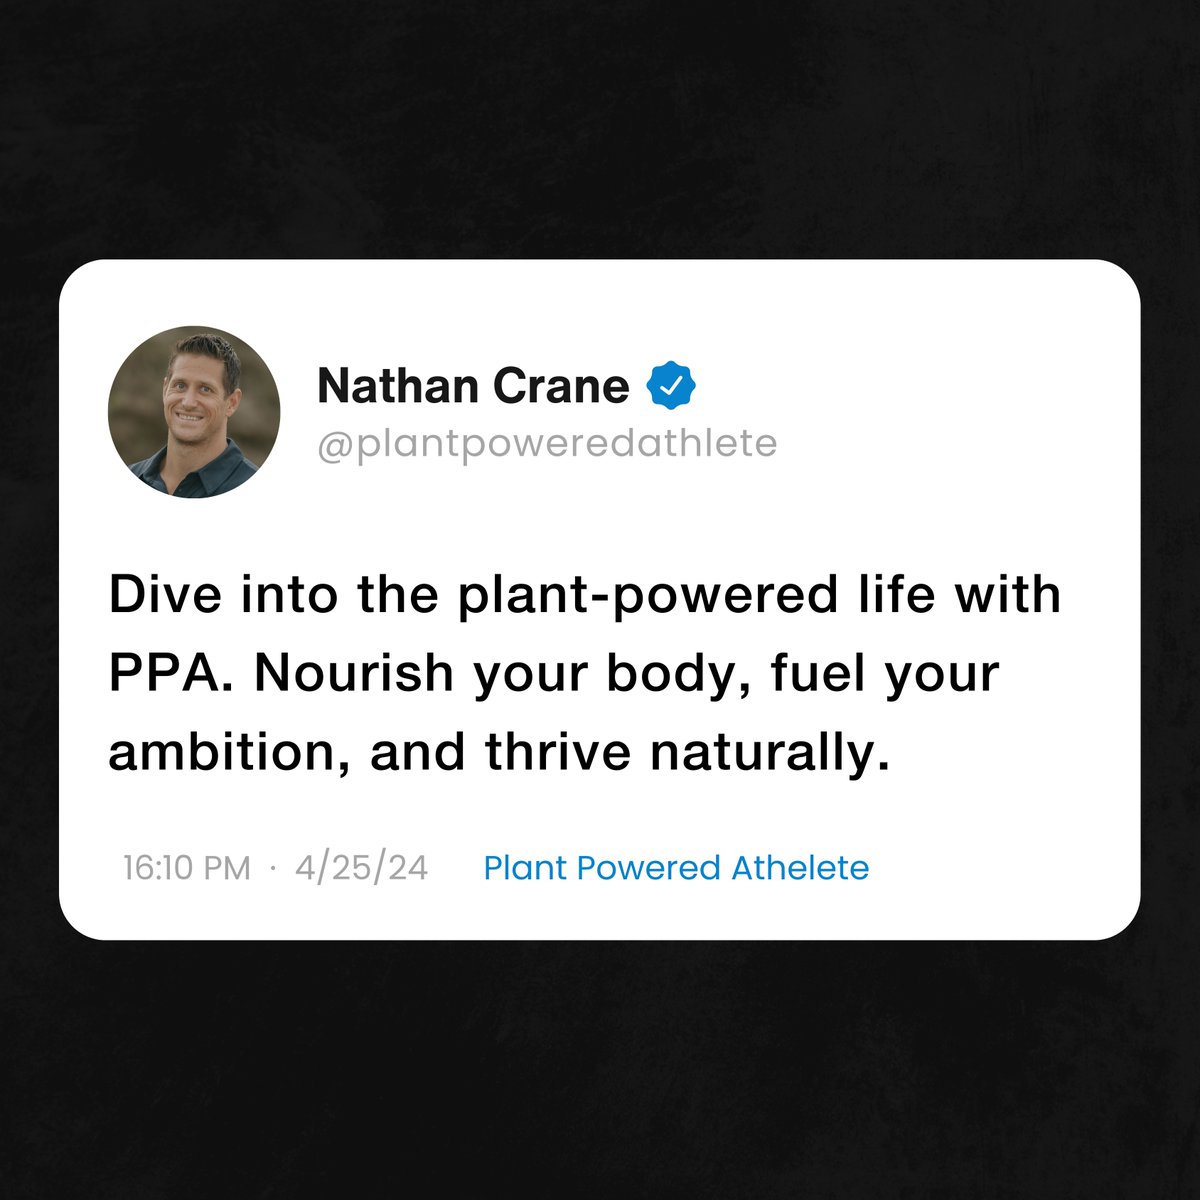 Elevate your game with nature's finest at PPA! 🍃💪 Your journey to excellence begins with every plant-powered sip.
.
.
.
.
.
#plantpoweredathlete #plantbasedprotein #plantbasedcoach #plantpowered #plantbased #plantbuilt #plantbasedfood #plantbaseddiet #veganathlete #plantbase...